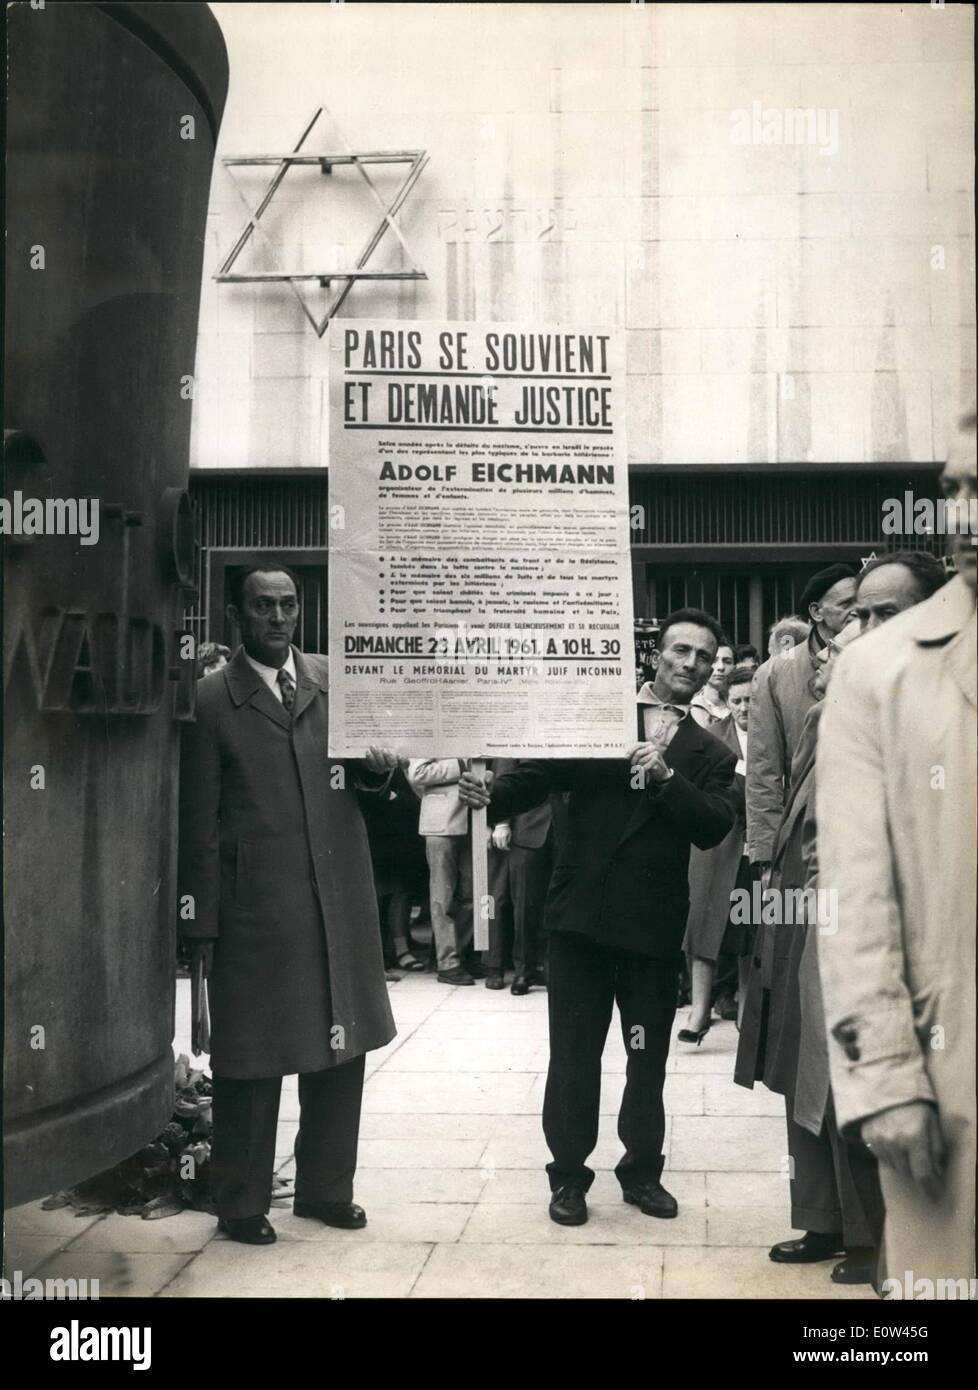 Apr. 04, 1961 - Eichmann Trial : ''Paris Won't Forget And Demands Justice A demonstration in connection with the Eichmann Trial Stock Photo